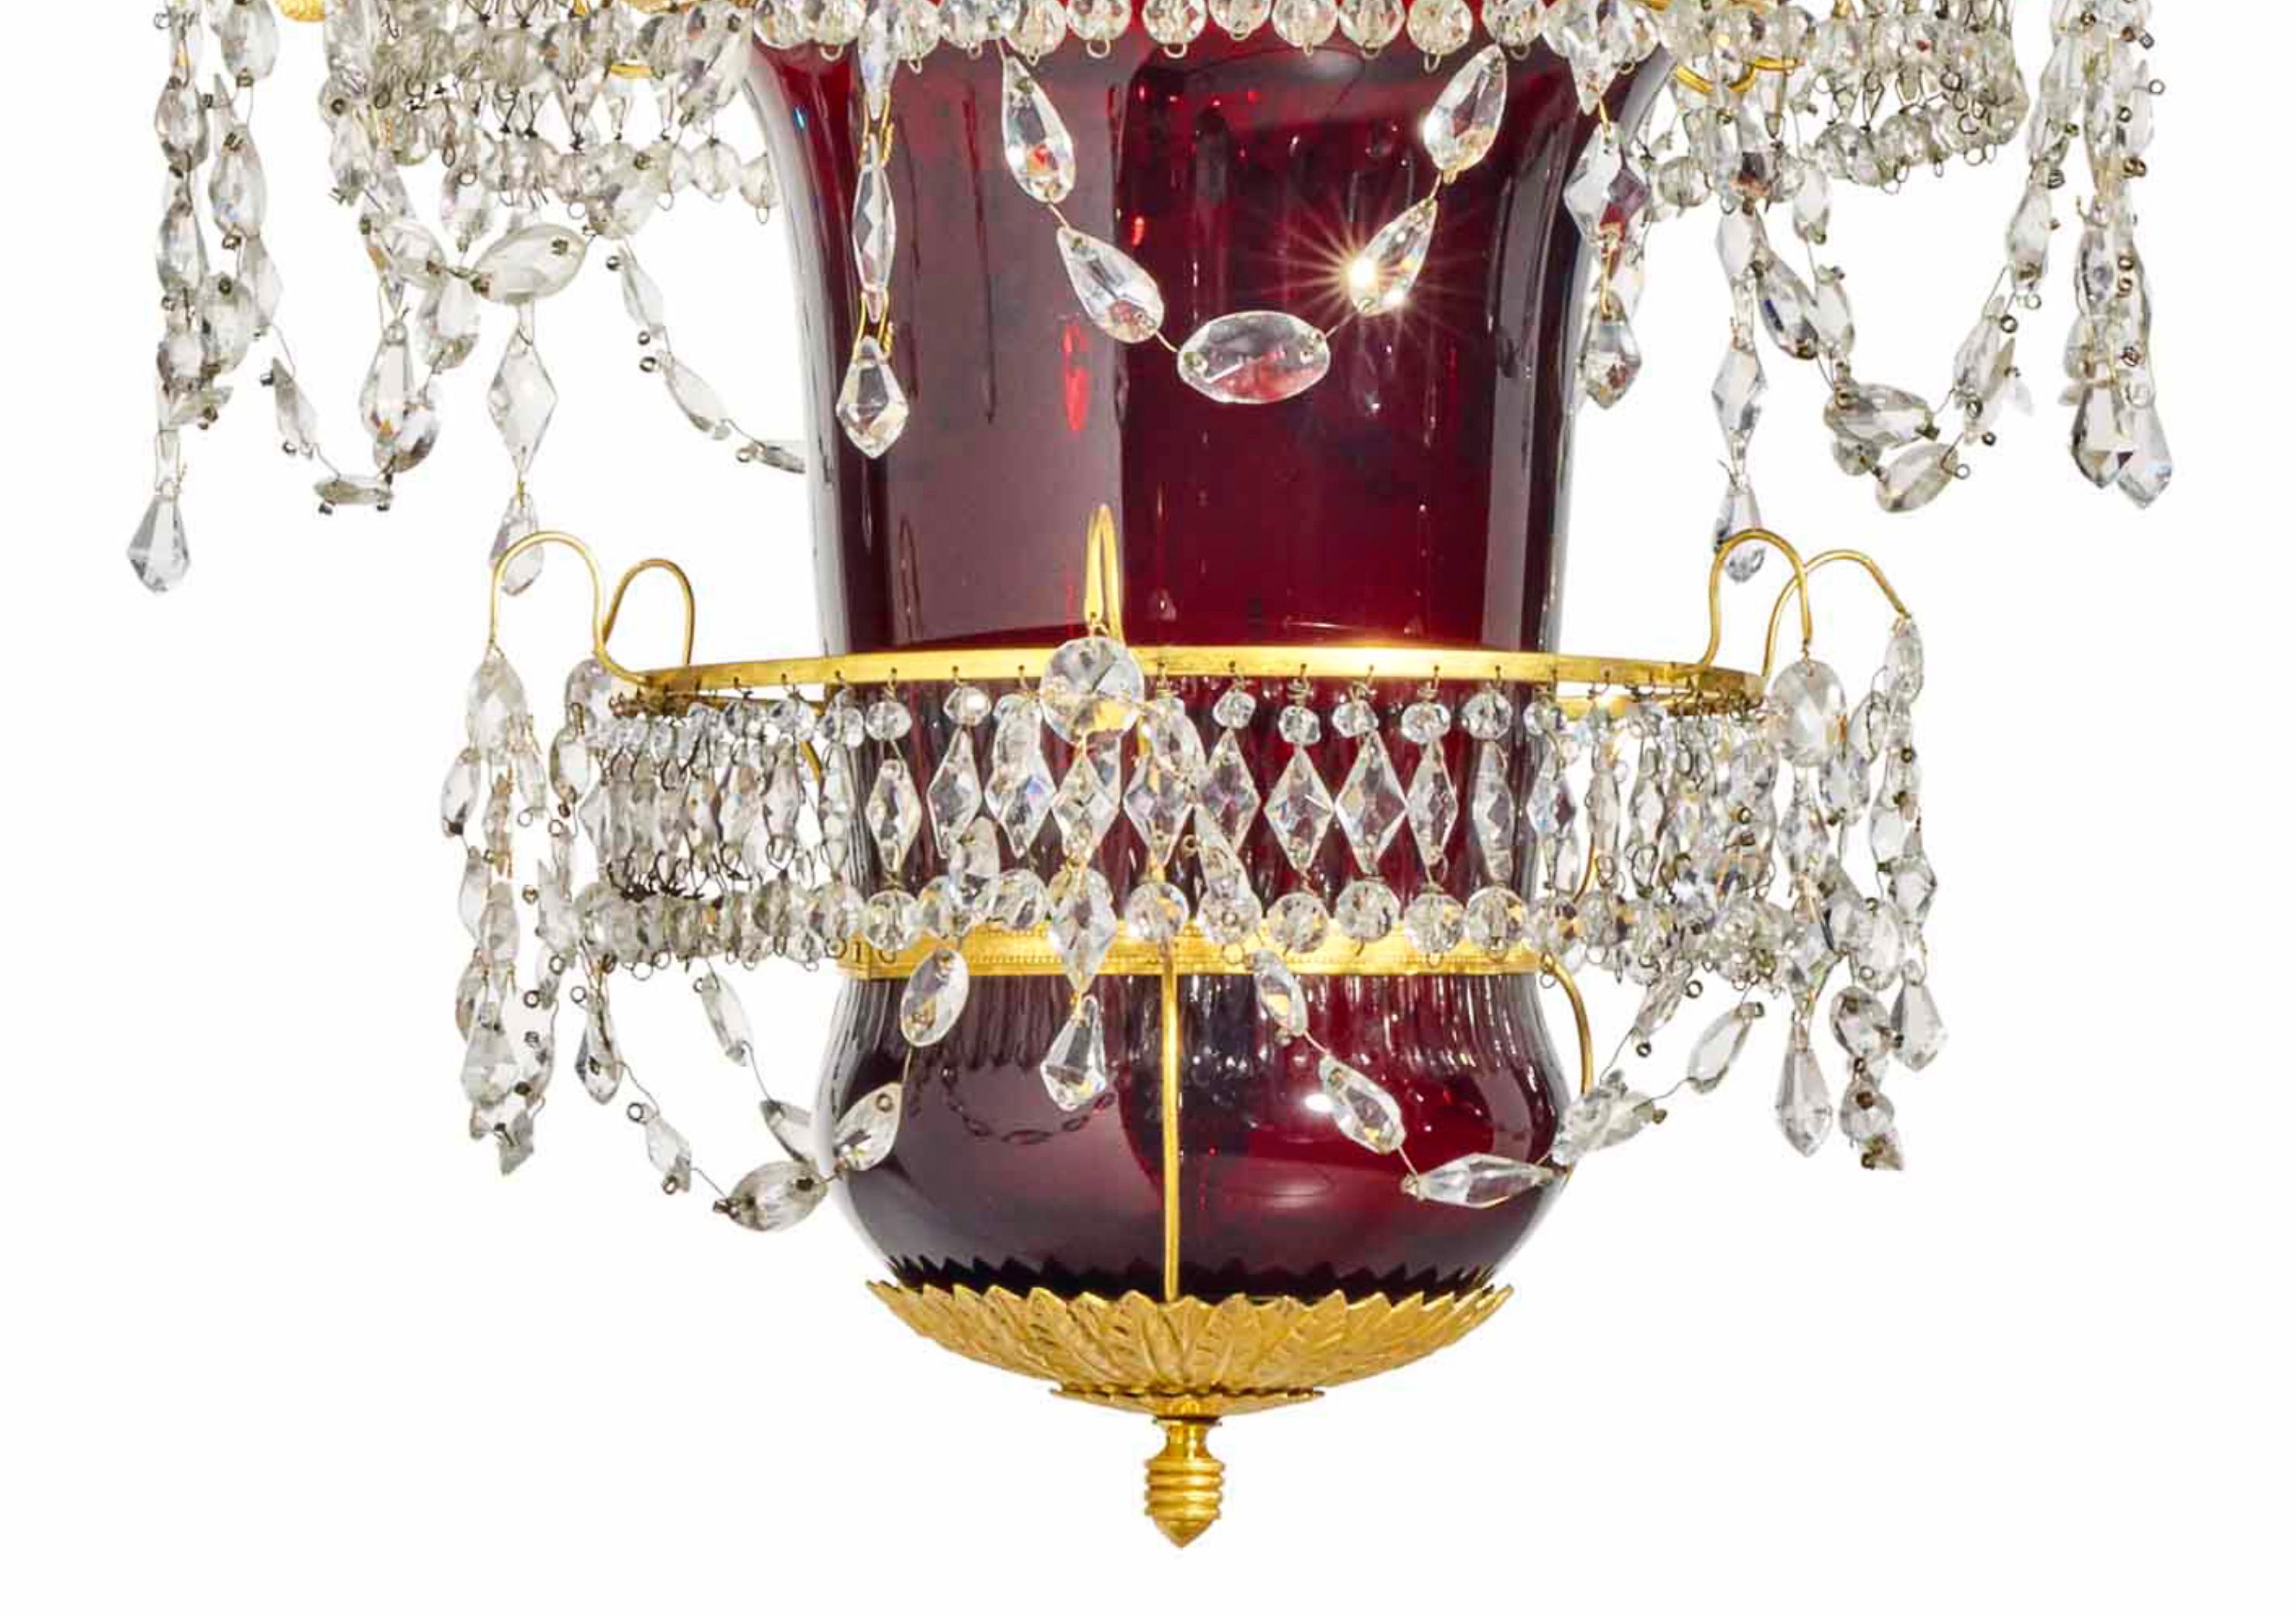 Early 19th century Russian ruby glass and ormolu chandelier or lantern. Original gilded bronze structure with original handcut crystal prisms. Swan necks holding candle cups

Provenance: Christies Paris to private collector.